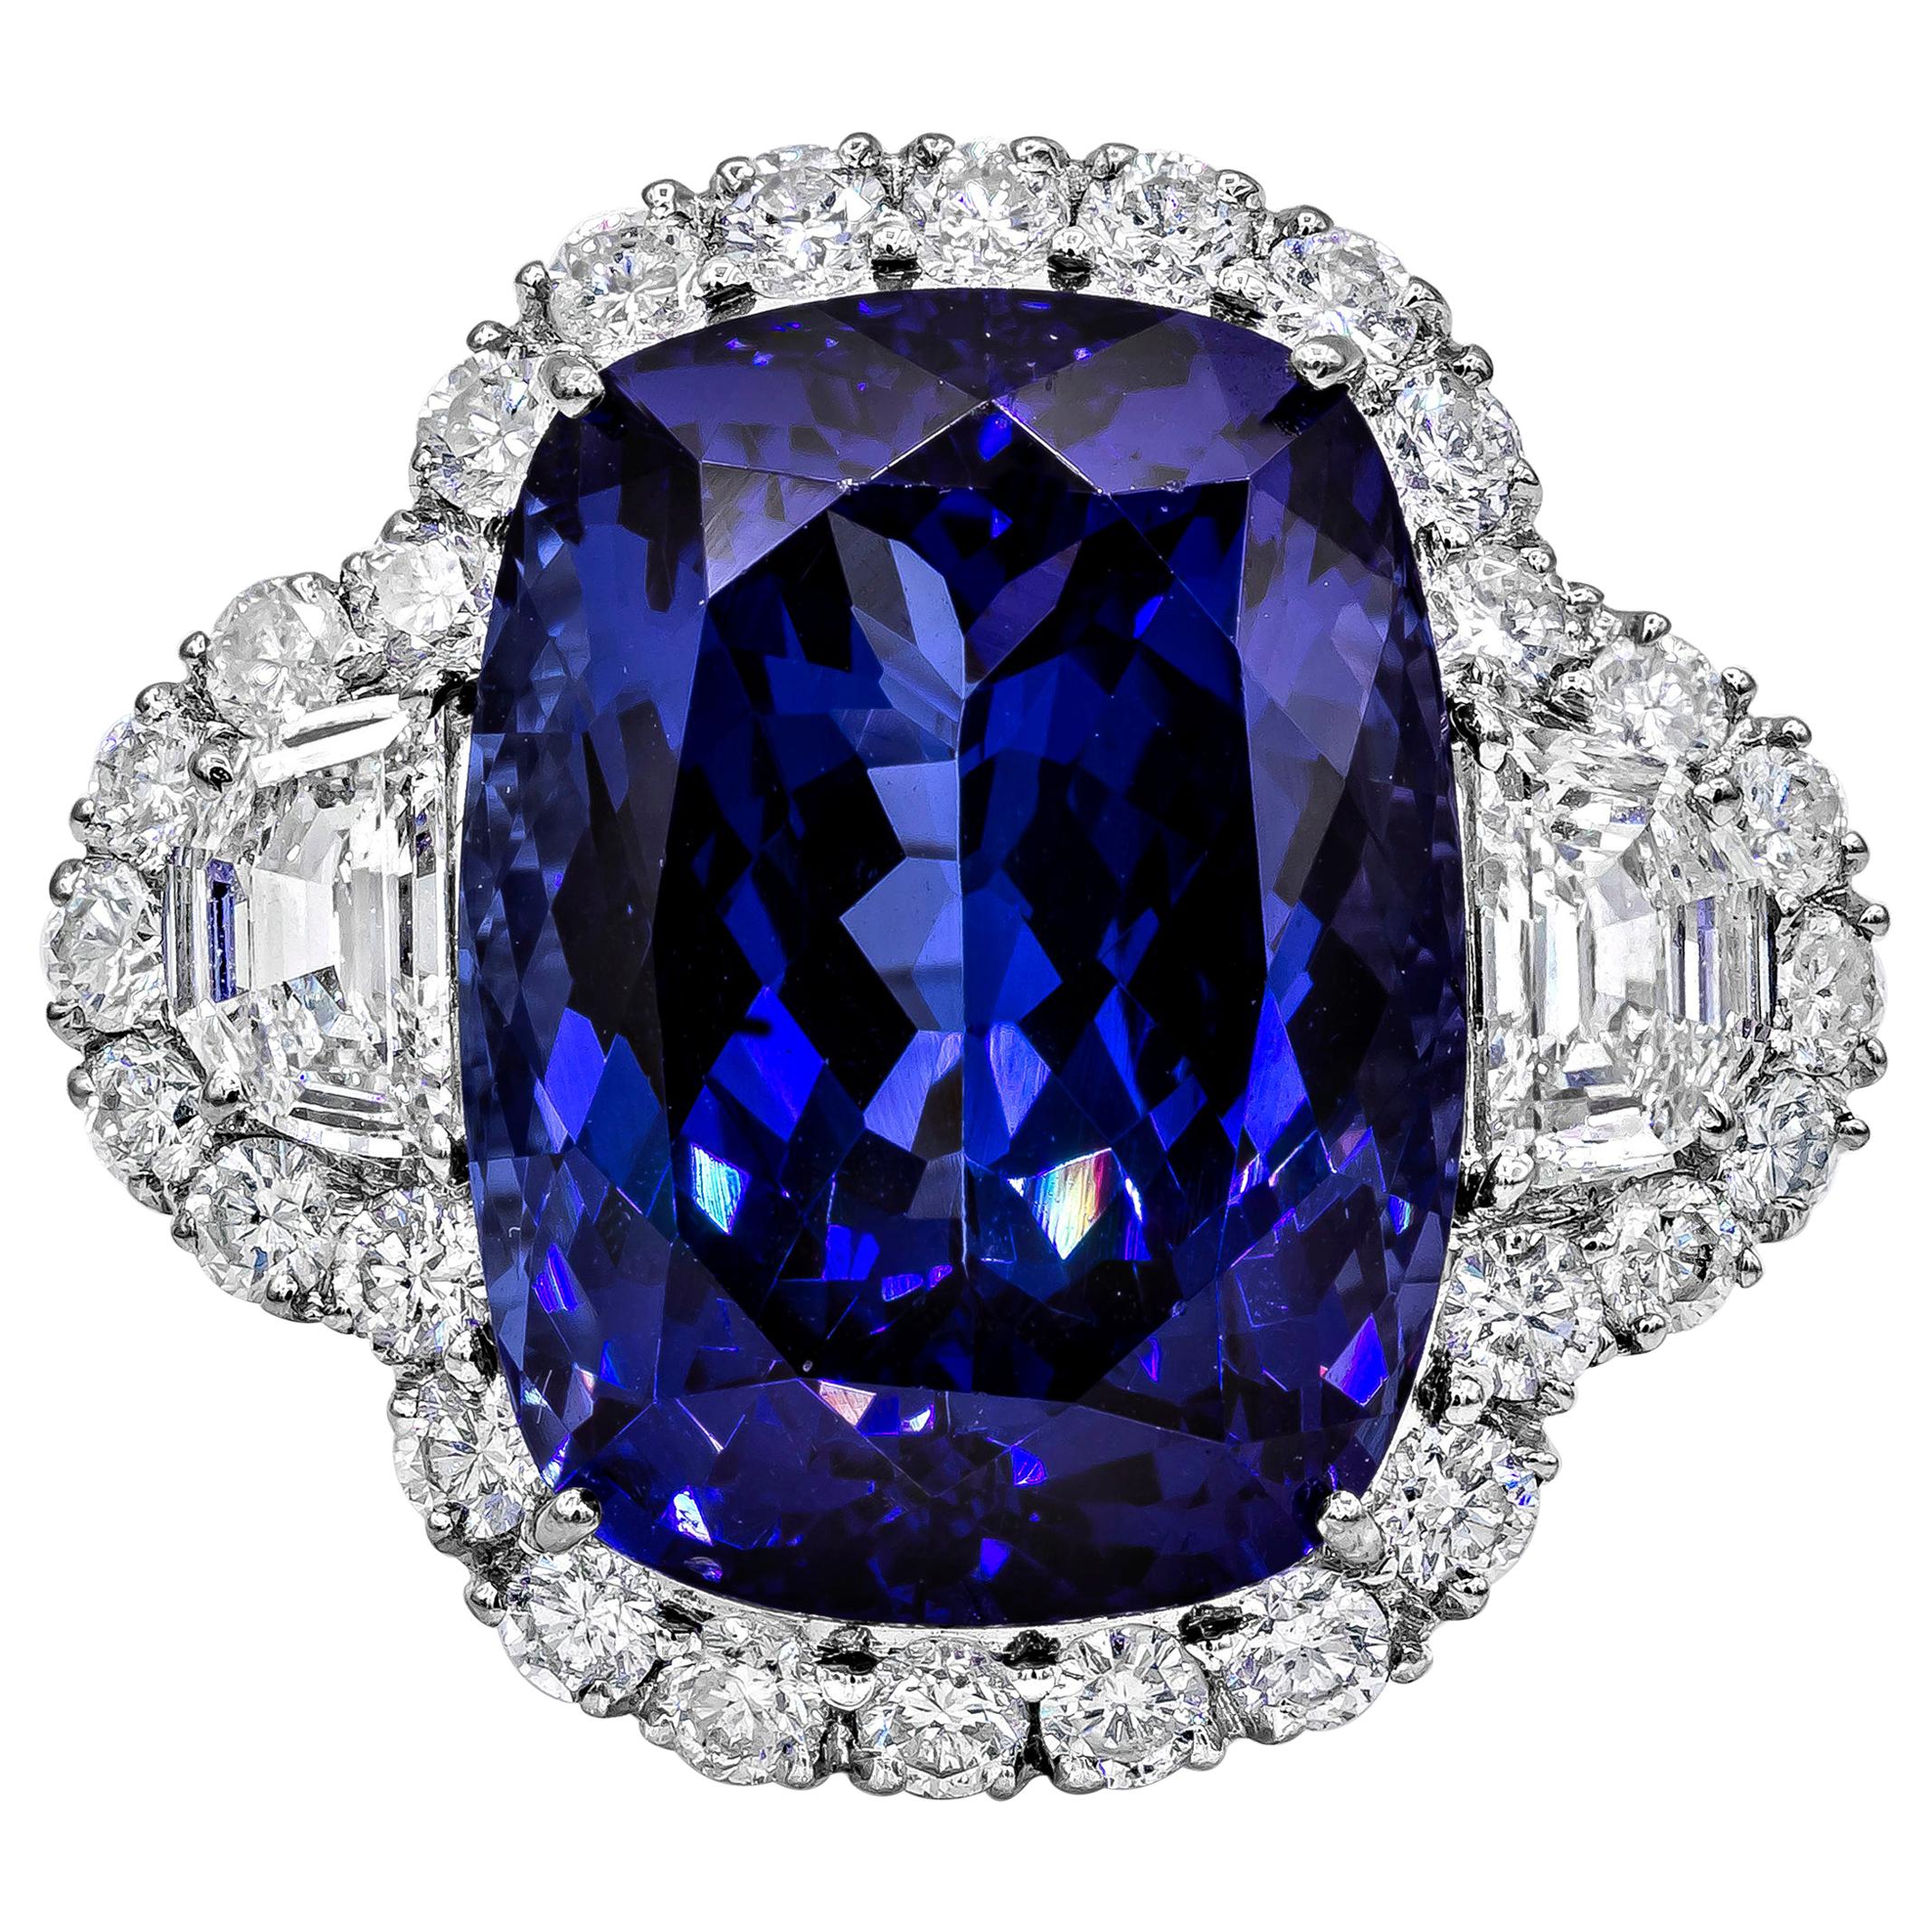 Exquisite Cushion-Cut Tanzanite and Diamond Ring at 1stDibs